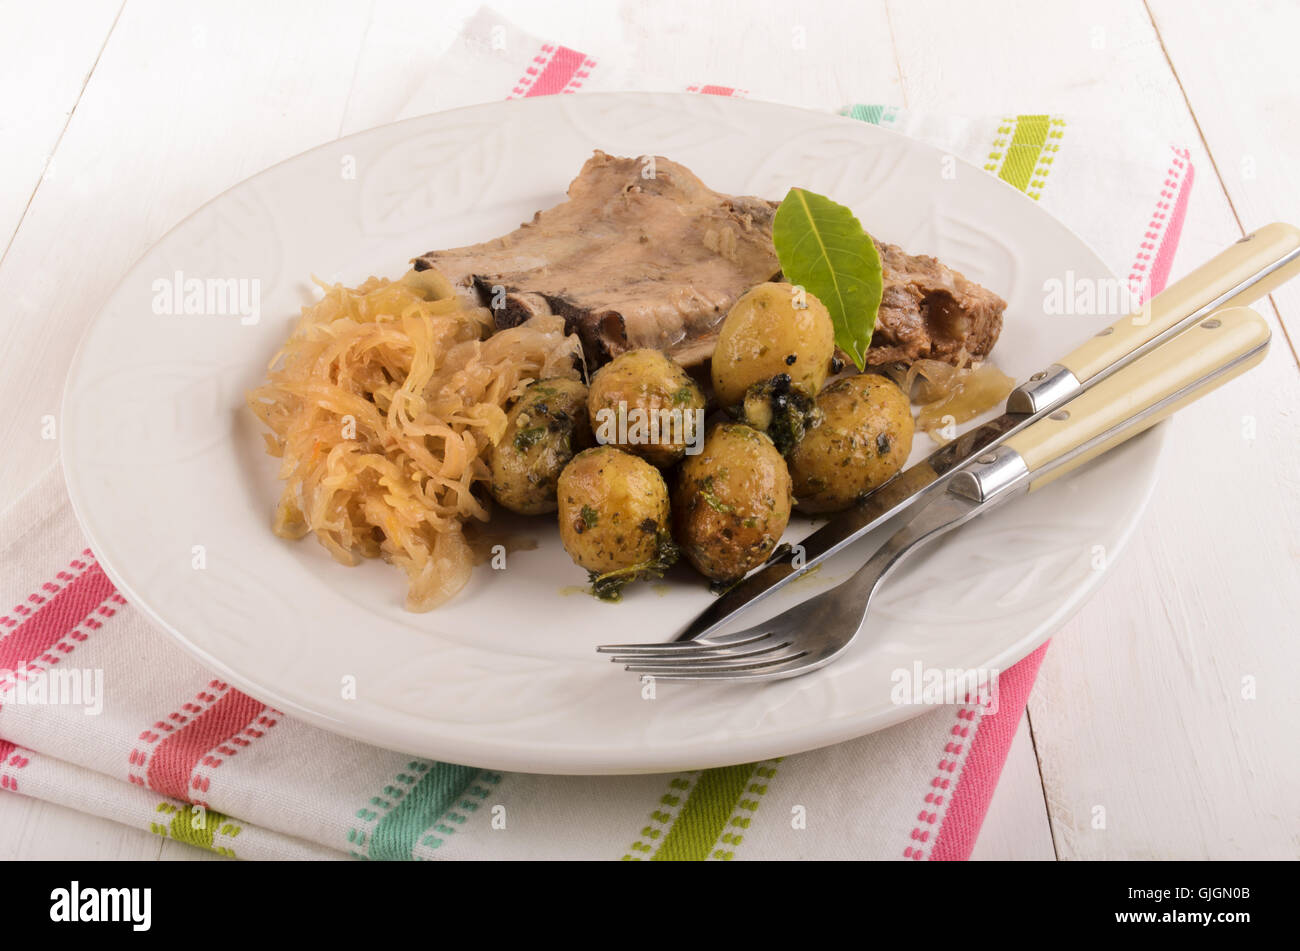 pickled cabbage with boiled pork ribs and spicy potatoes on a plate Stock Photo